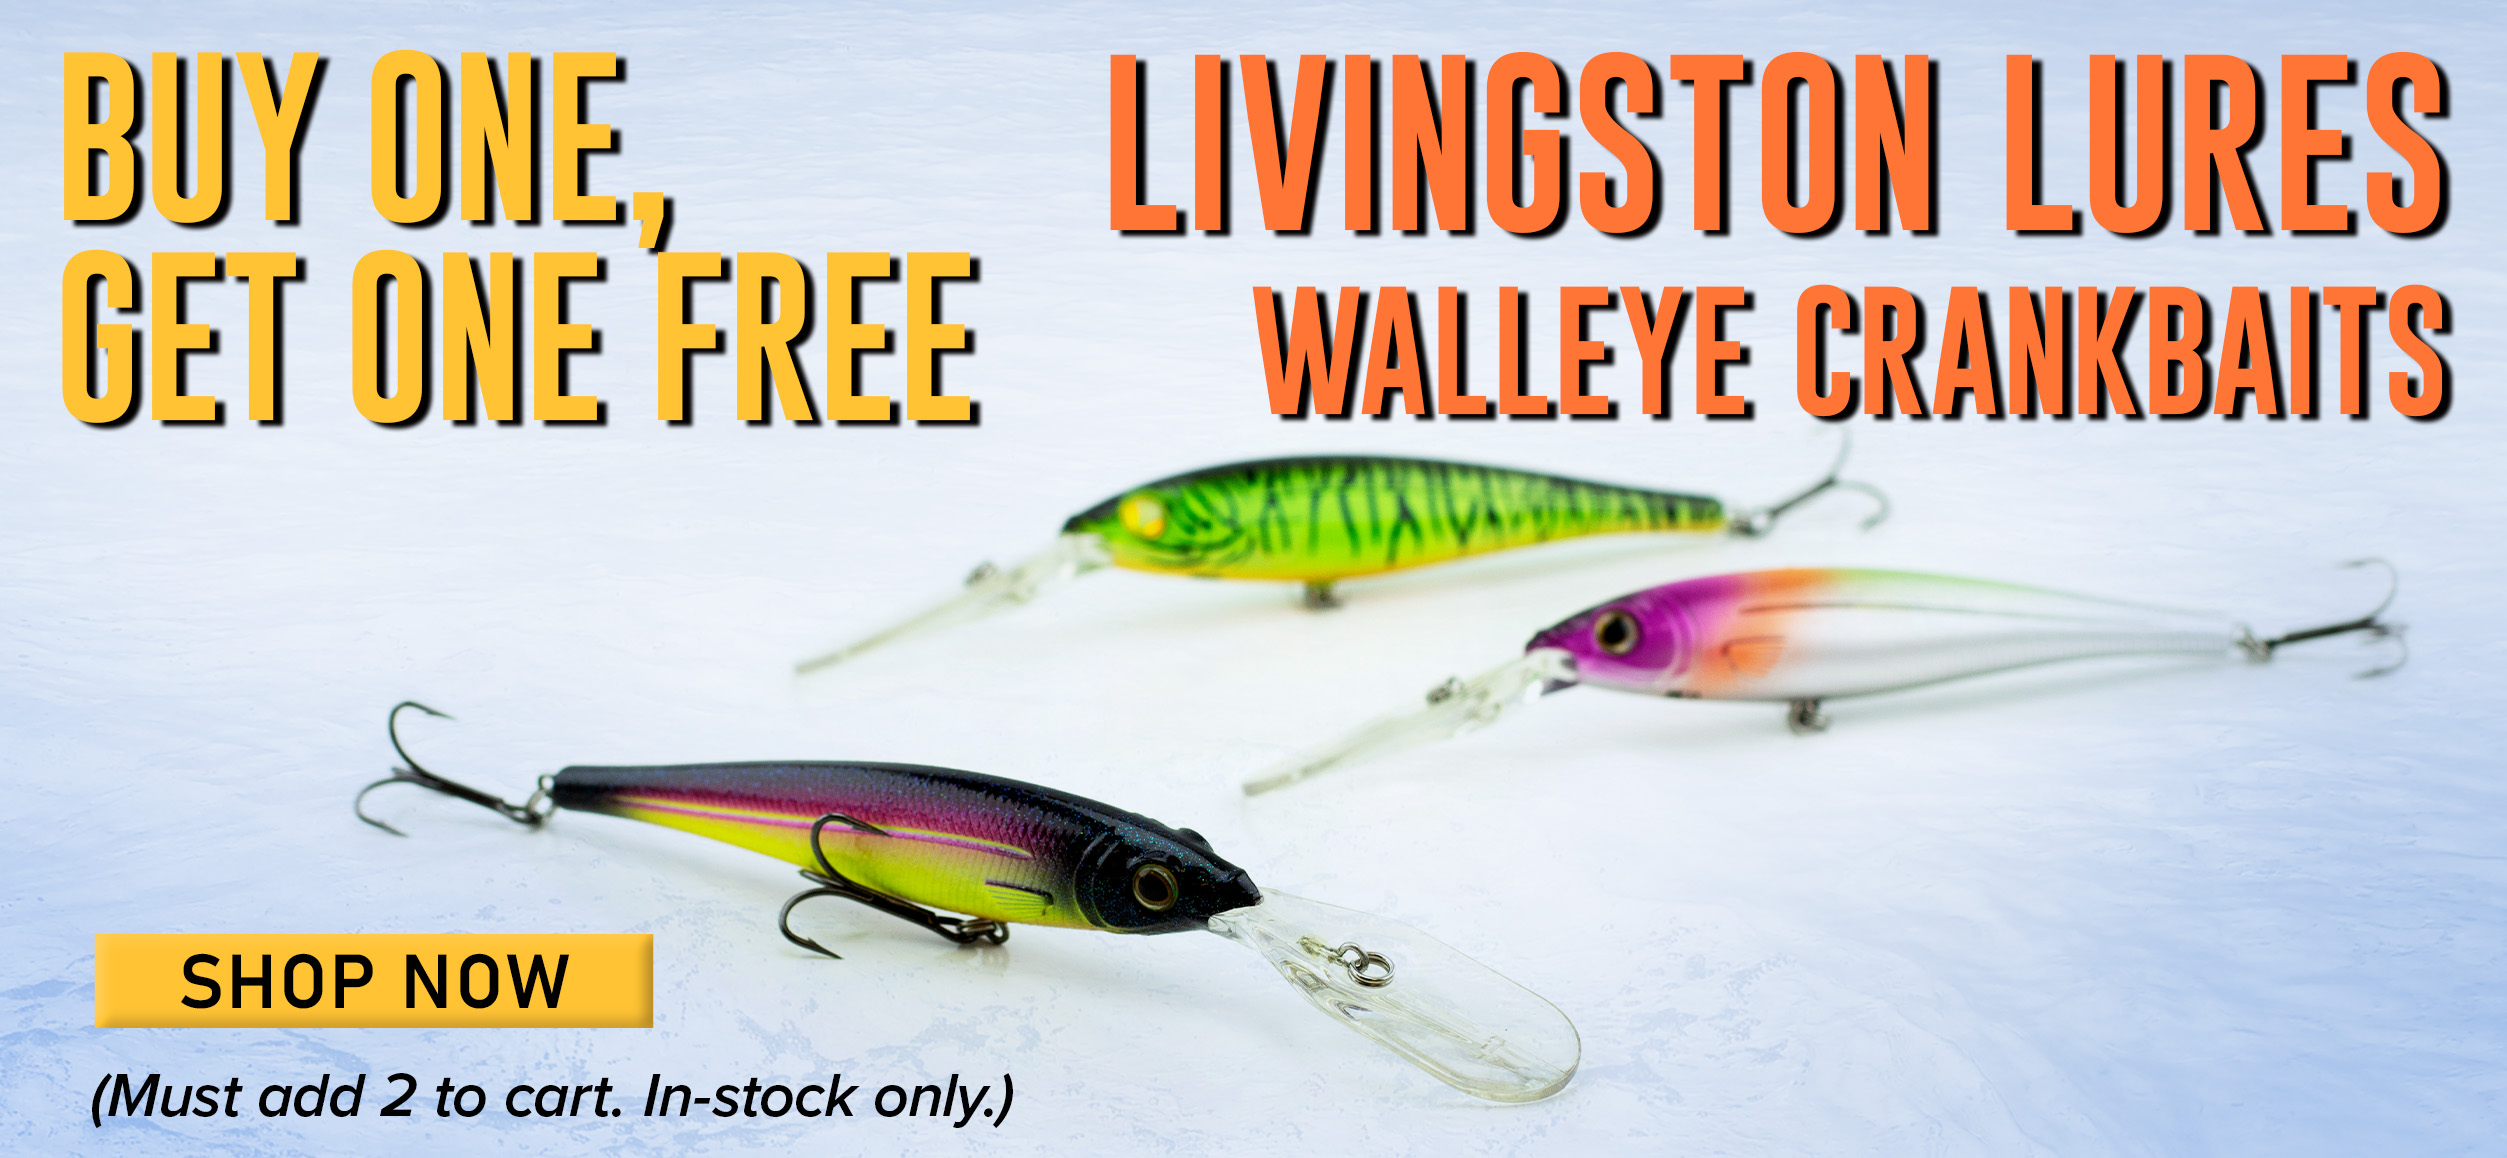 Buy one, Get one free Livingston Lures Walleye Crankbaits Shop Now (Must add 2 to cart. In-stock only.)